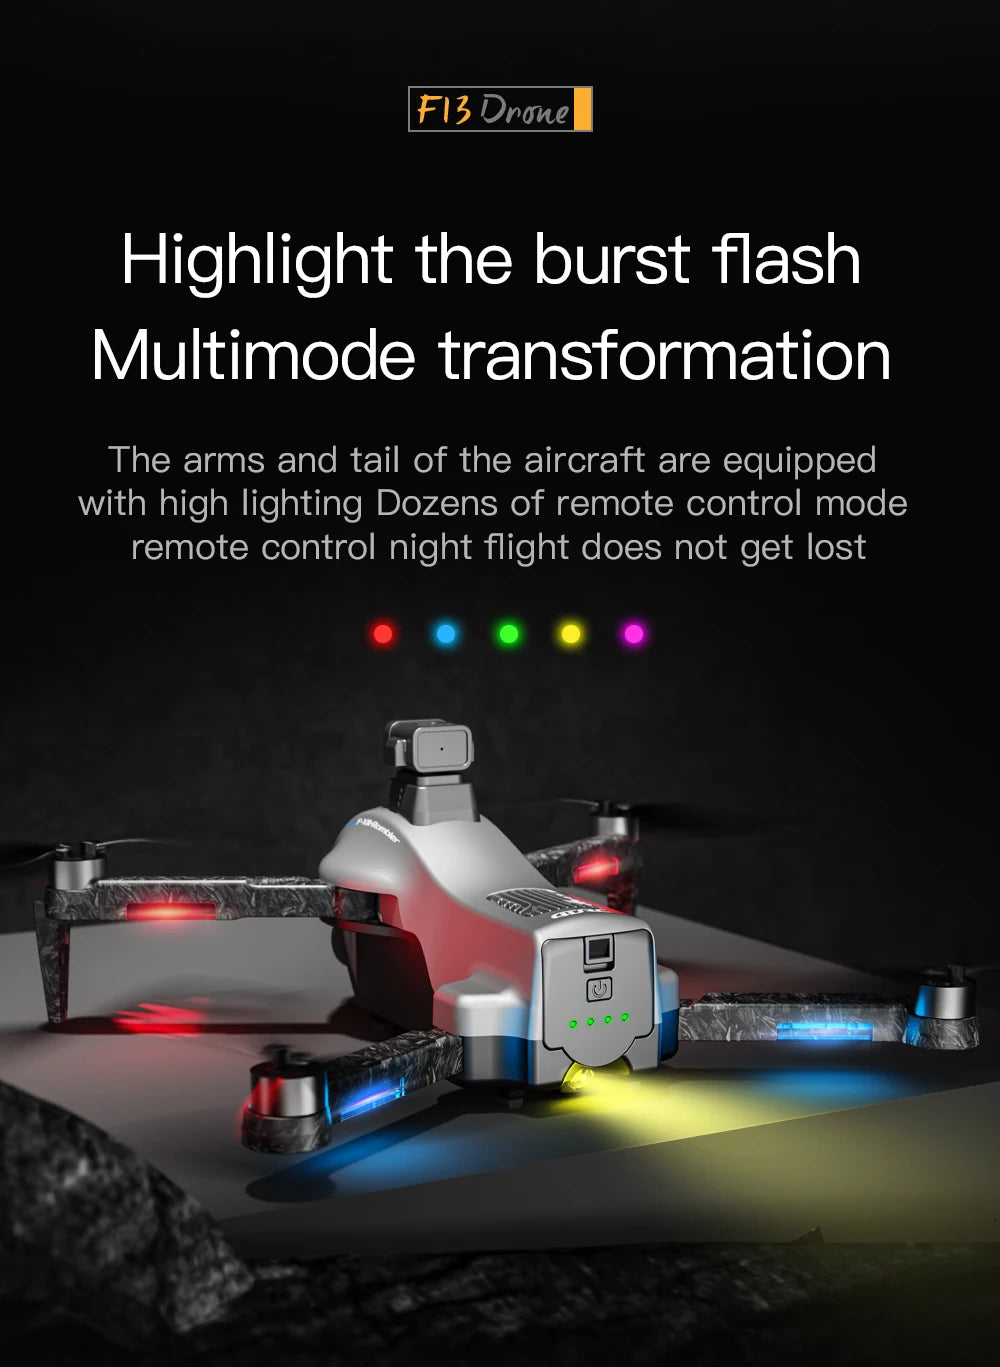 F13 Drone, F13 Dnone] Highlight the burst flash Multimode transformation The arms and tail